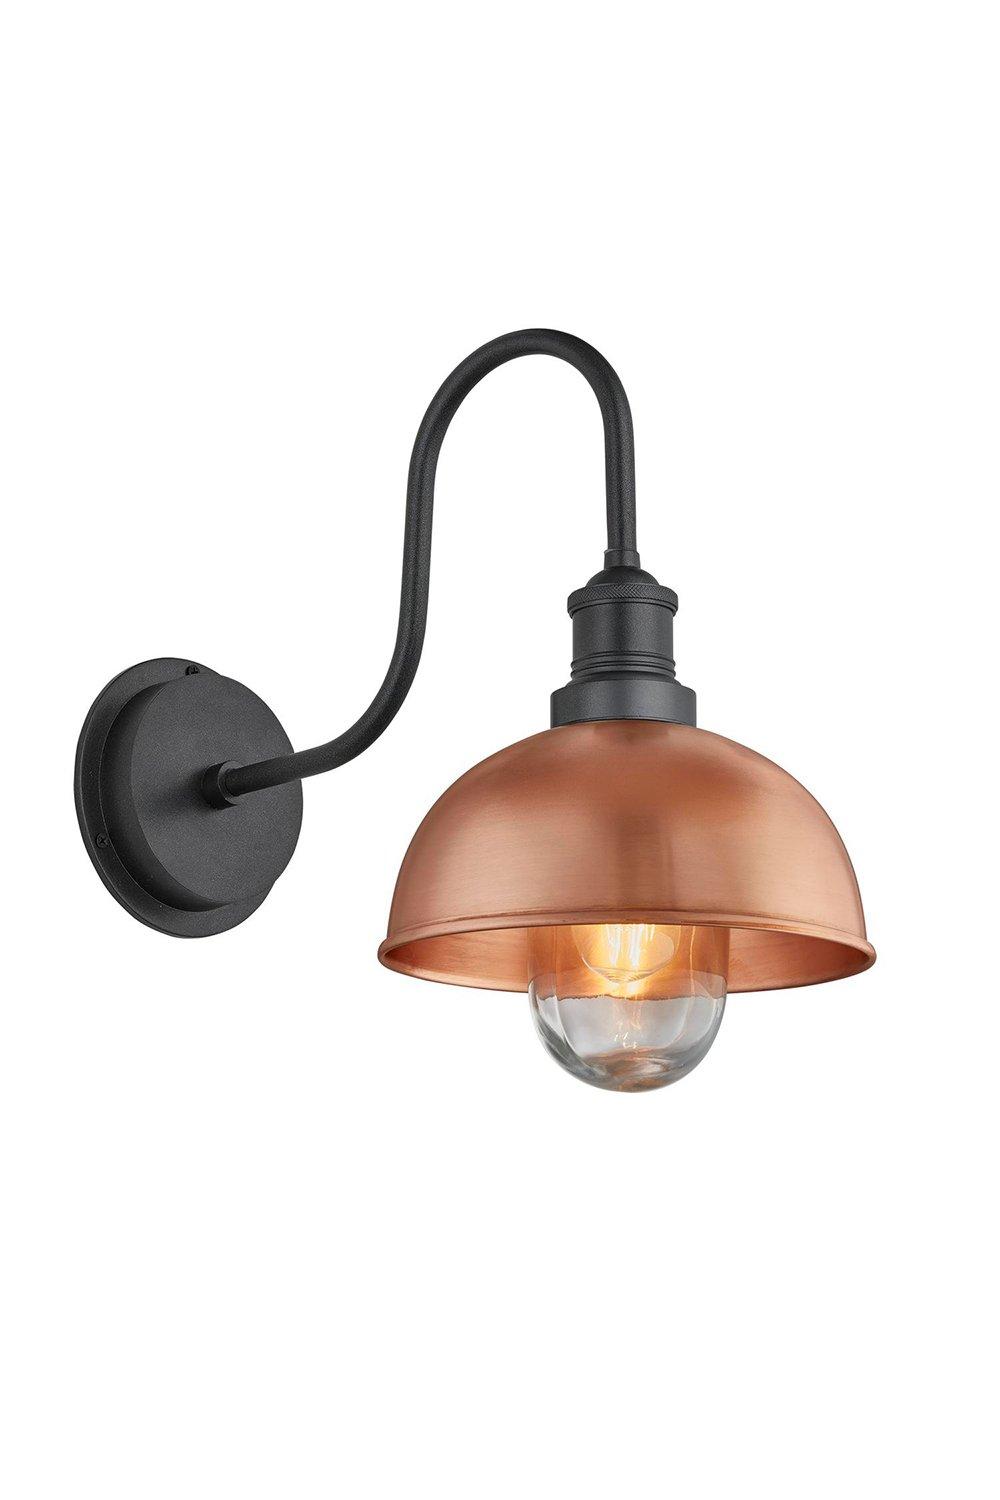 Swan Neck Outdoor & Bathroom Dome Wall Light, 8 Inch, Copper, Pewter Holder